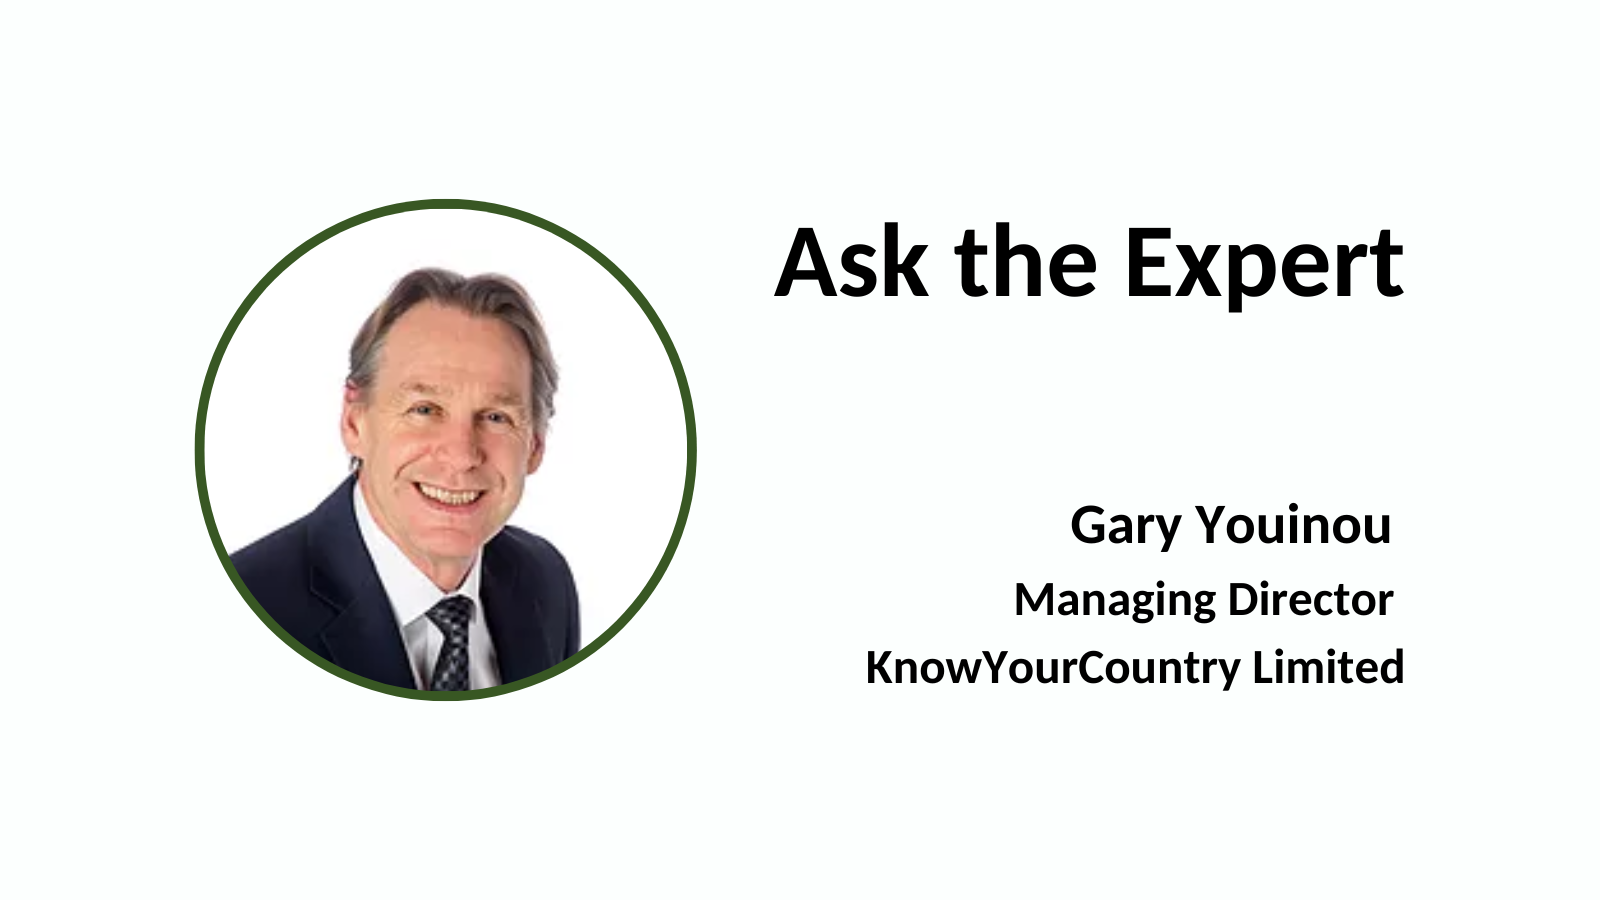 Ask the Expert: Gary Youinou, Managing Director, KnowYourCountry Limited